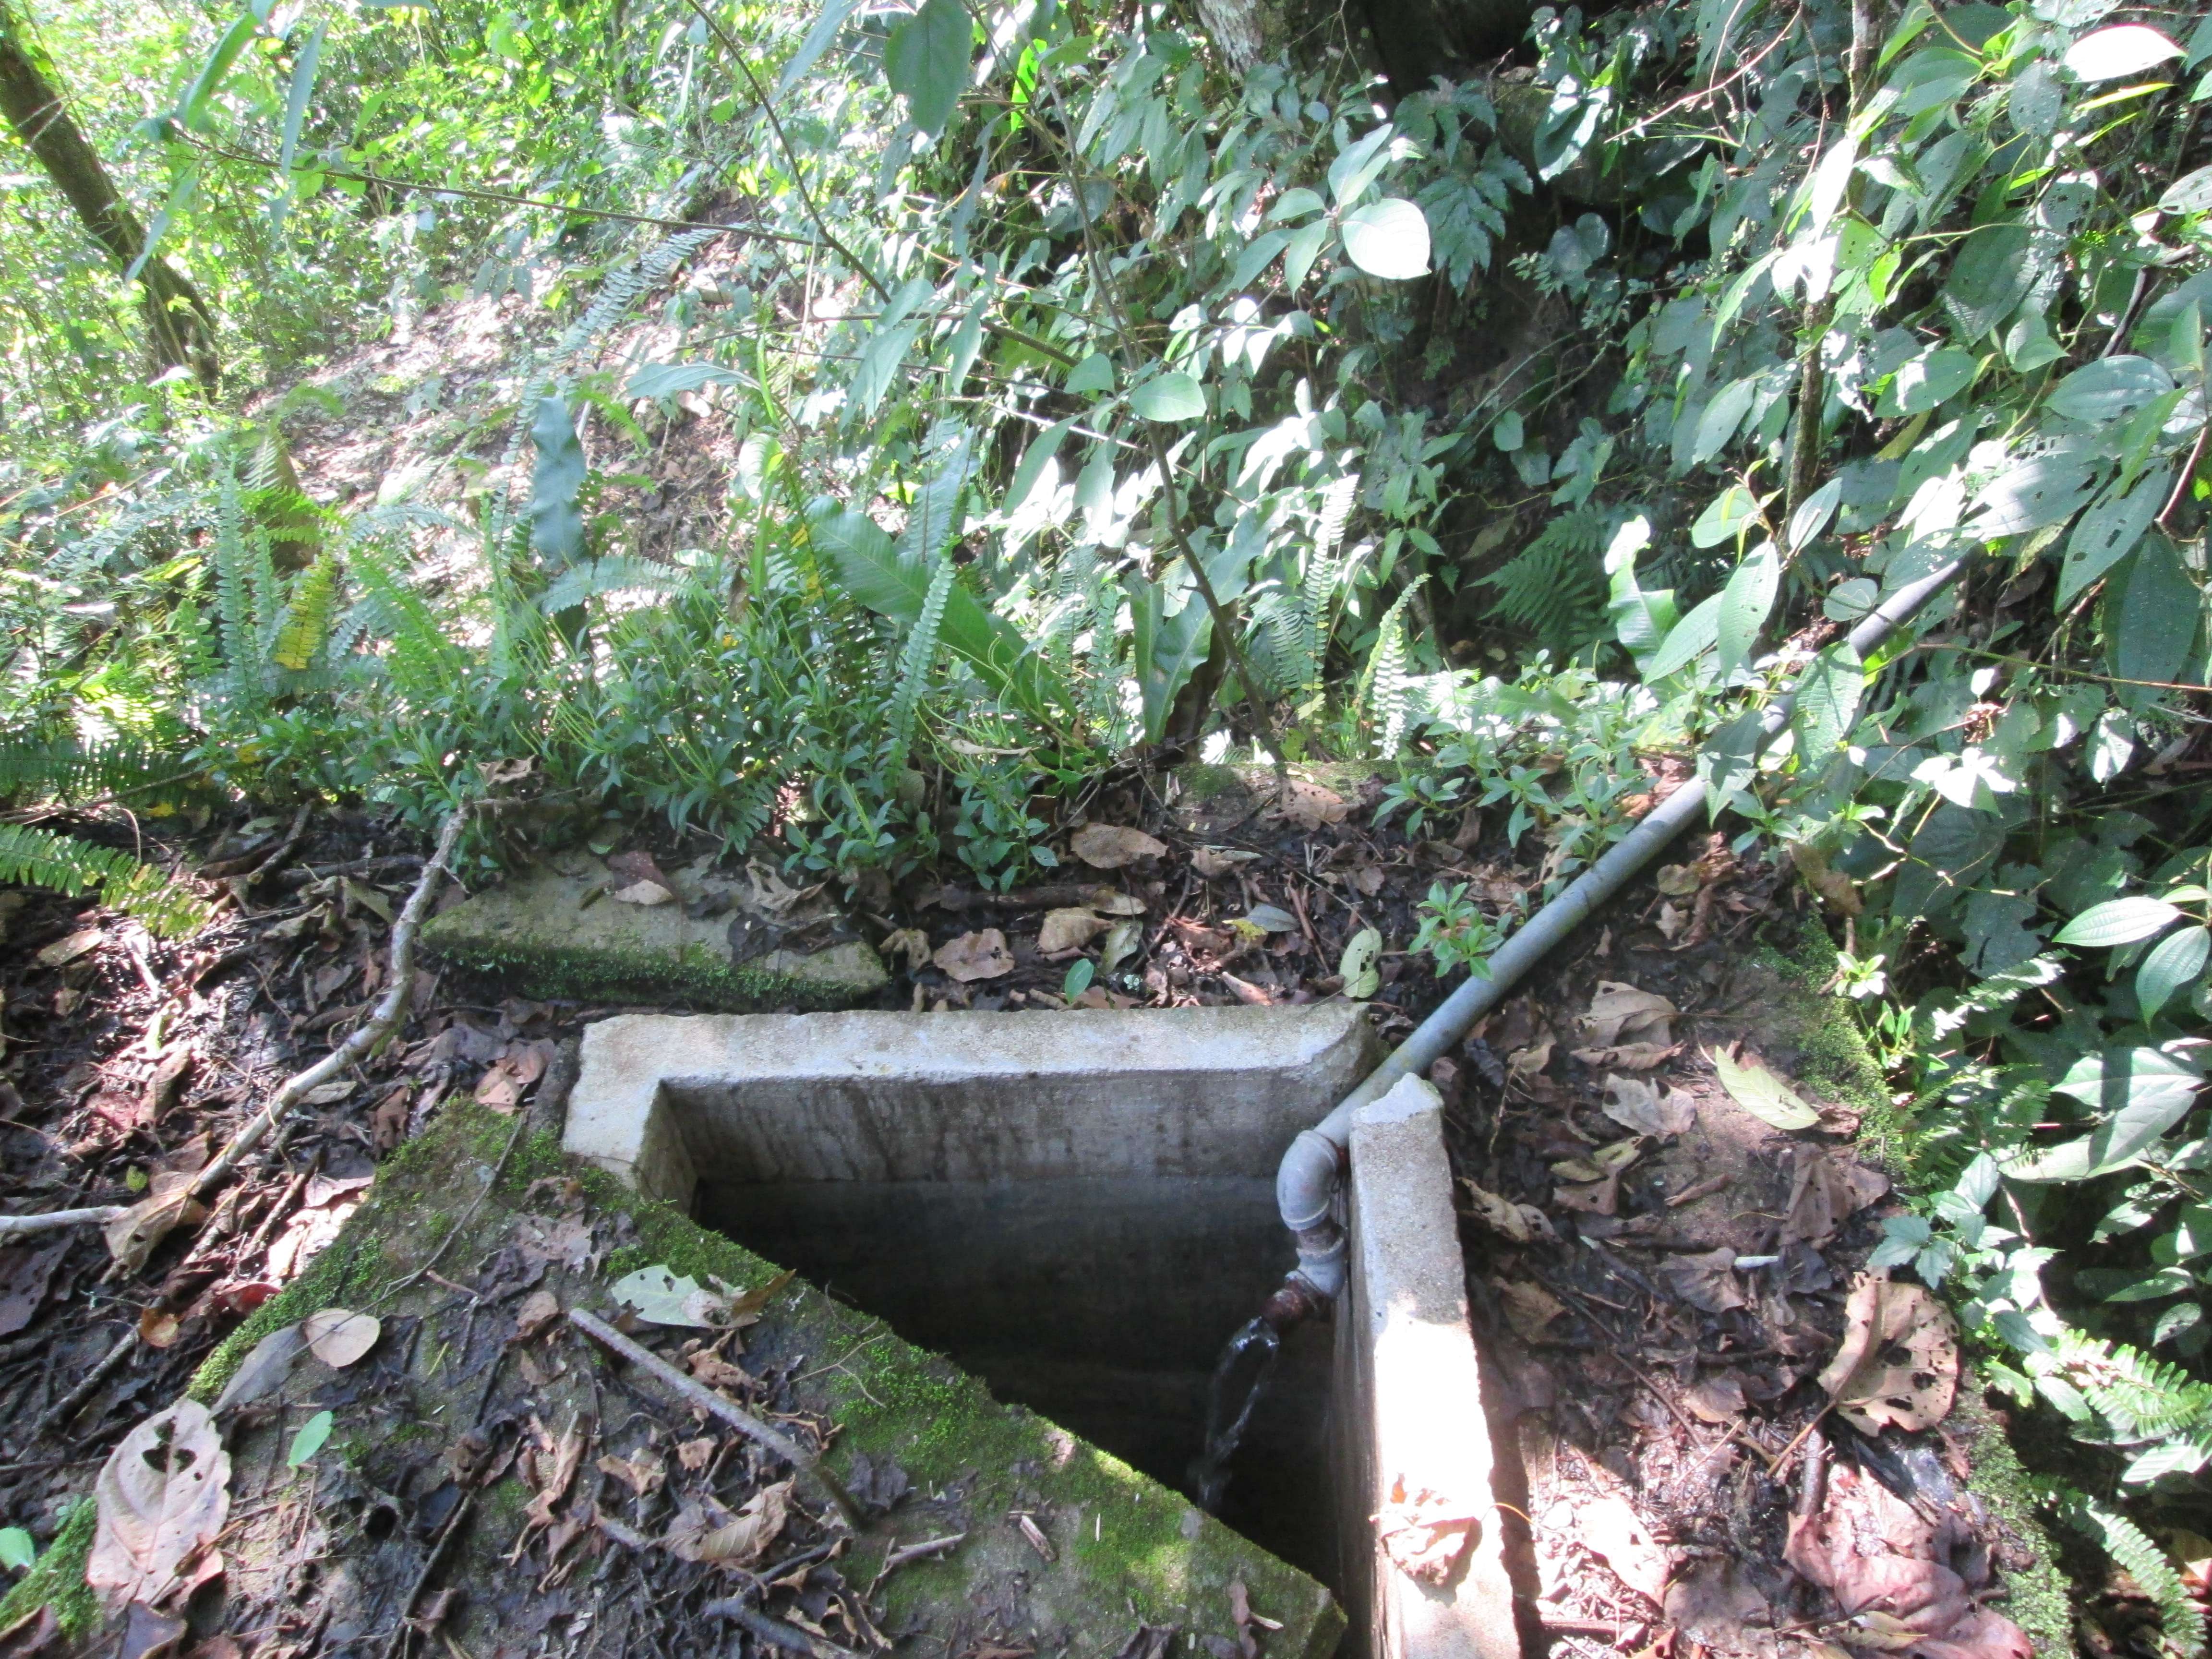 A concrete block, with a concrete door pulled away to reveal a flowing water spout